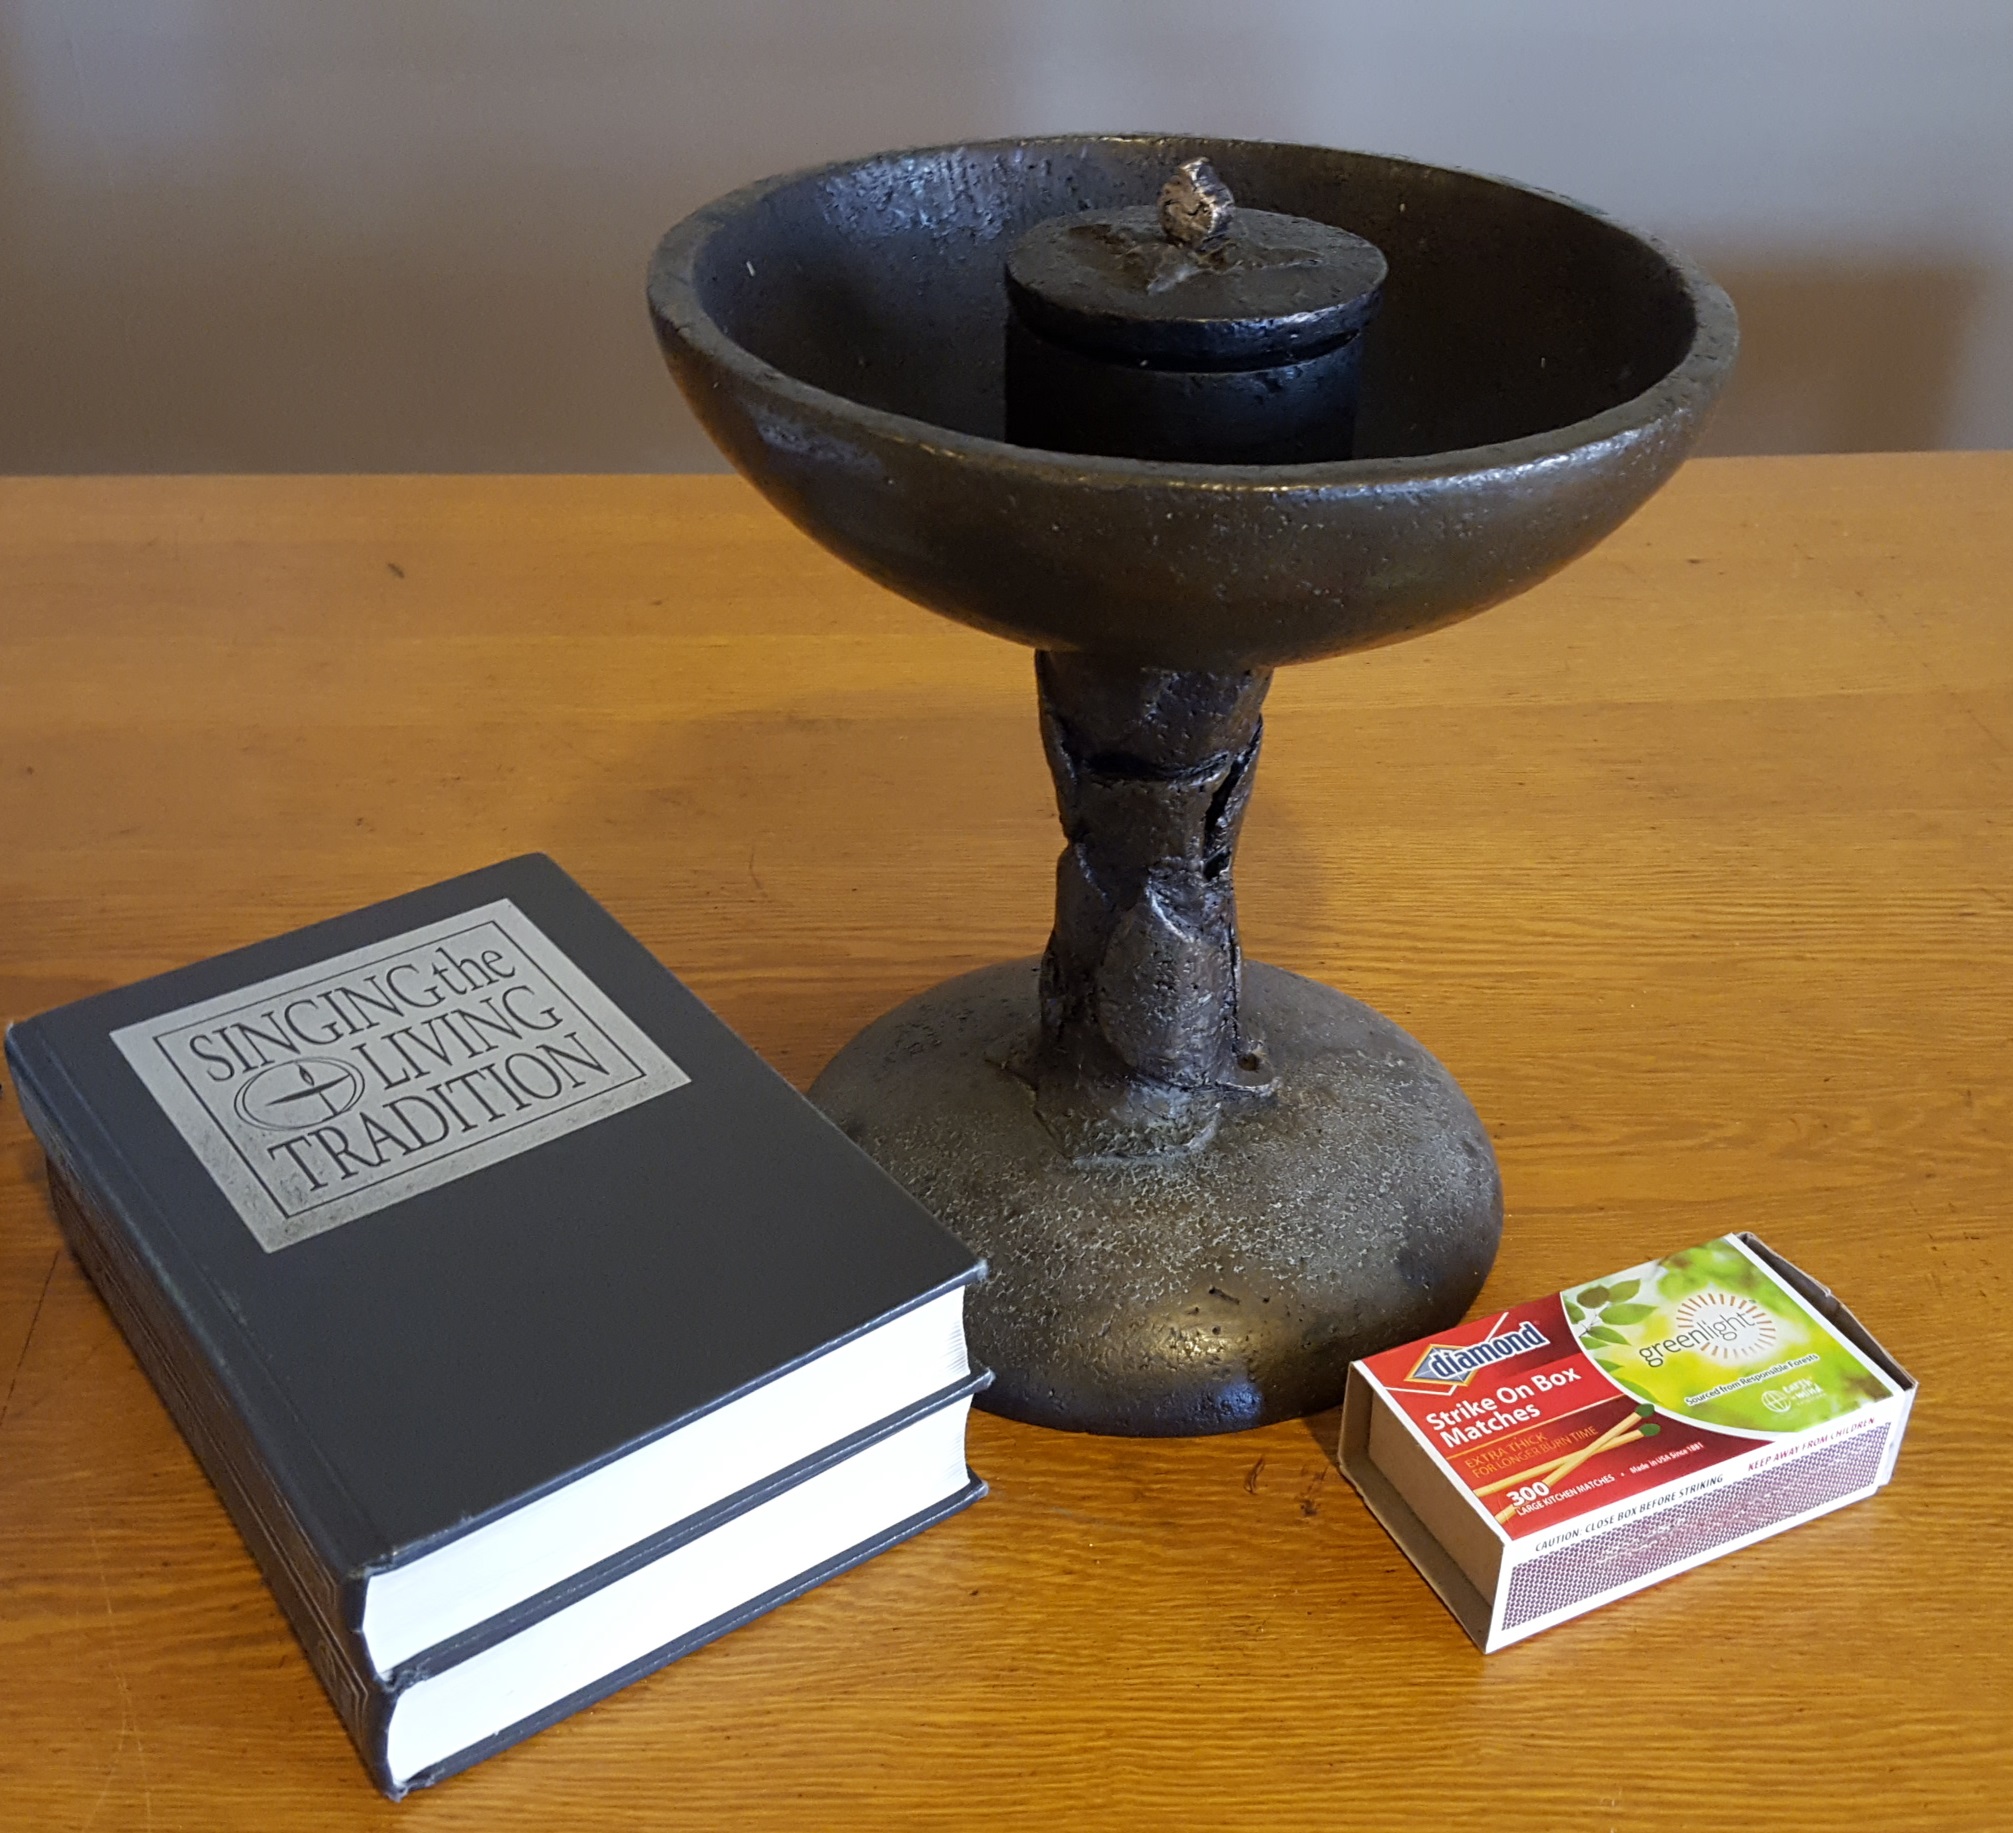 Chalice, hymnals and matches on a table